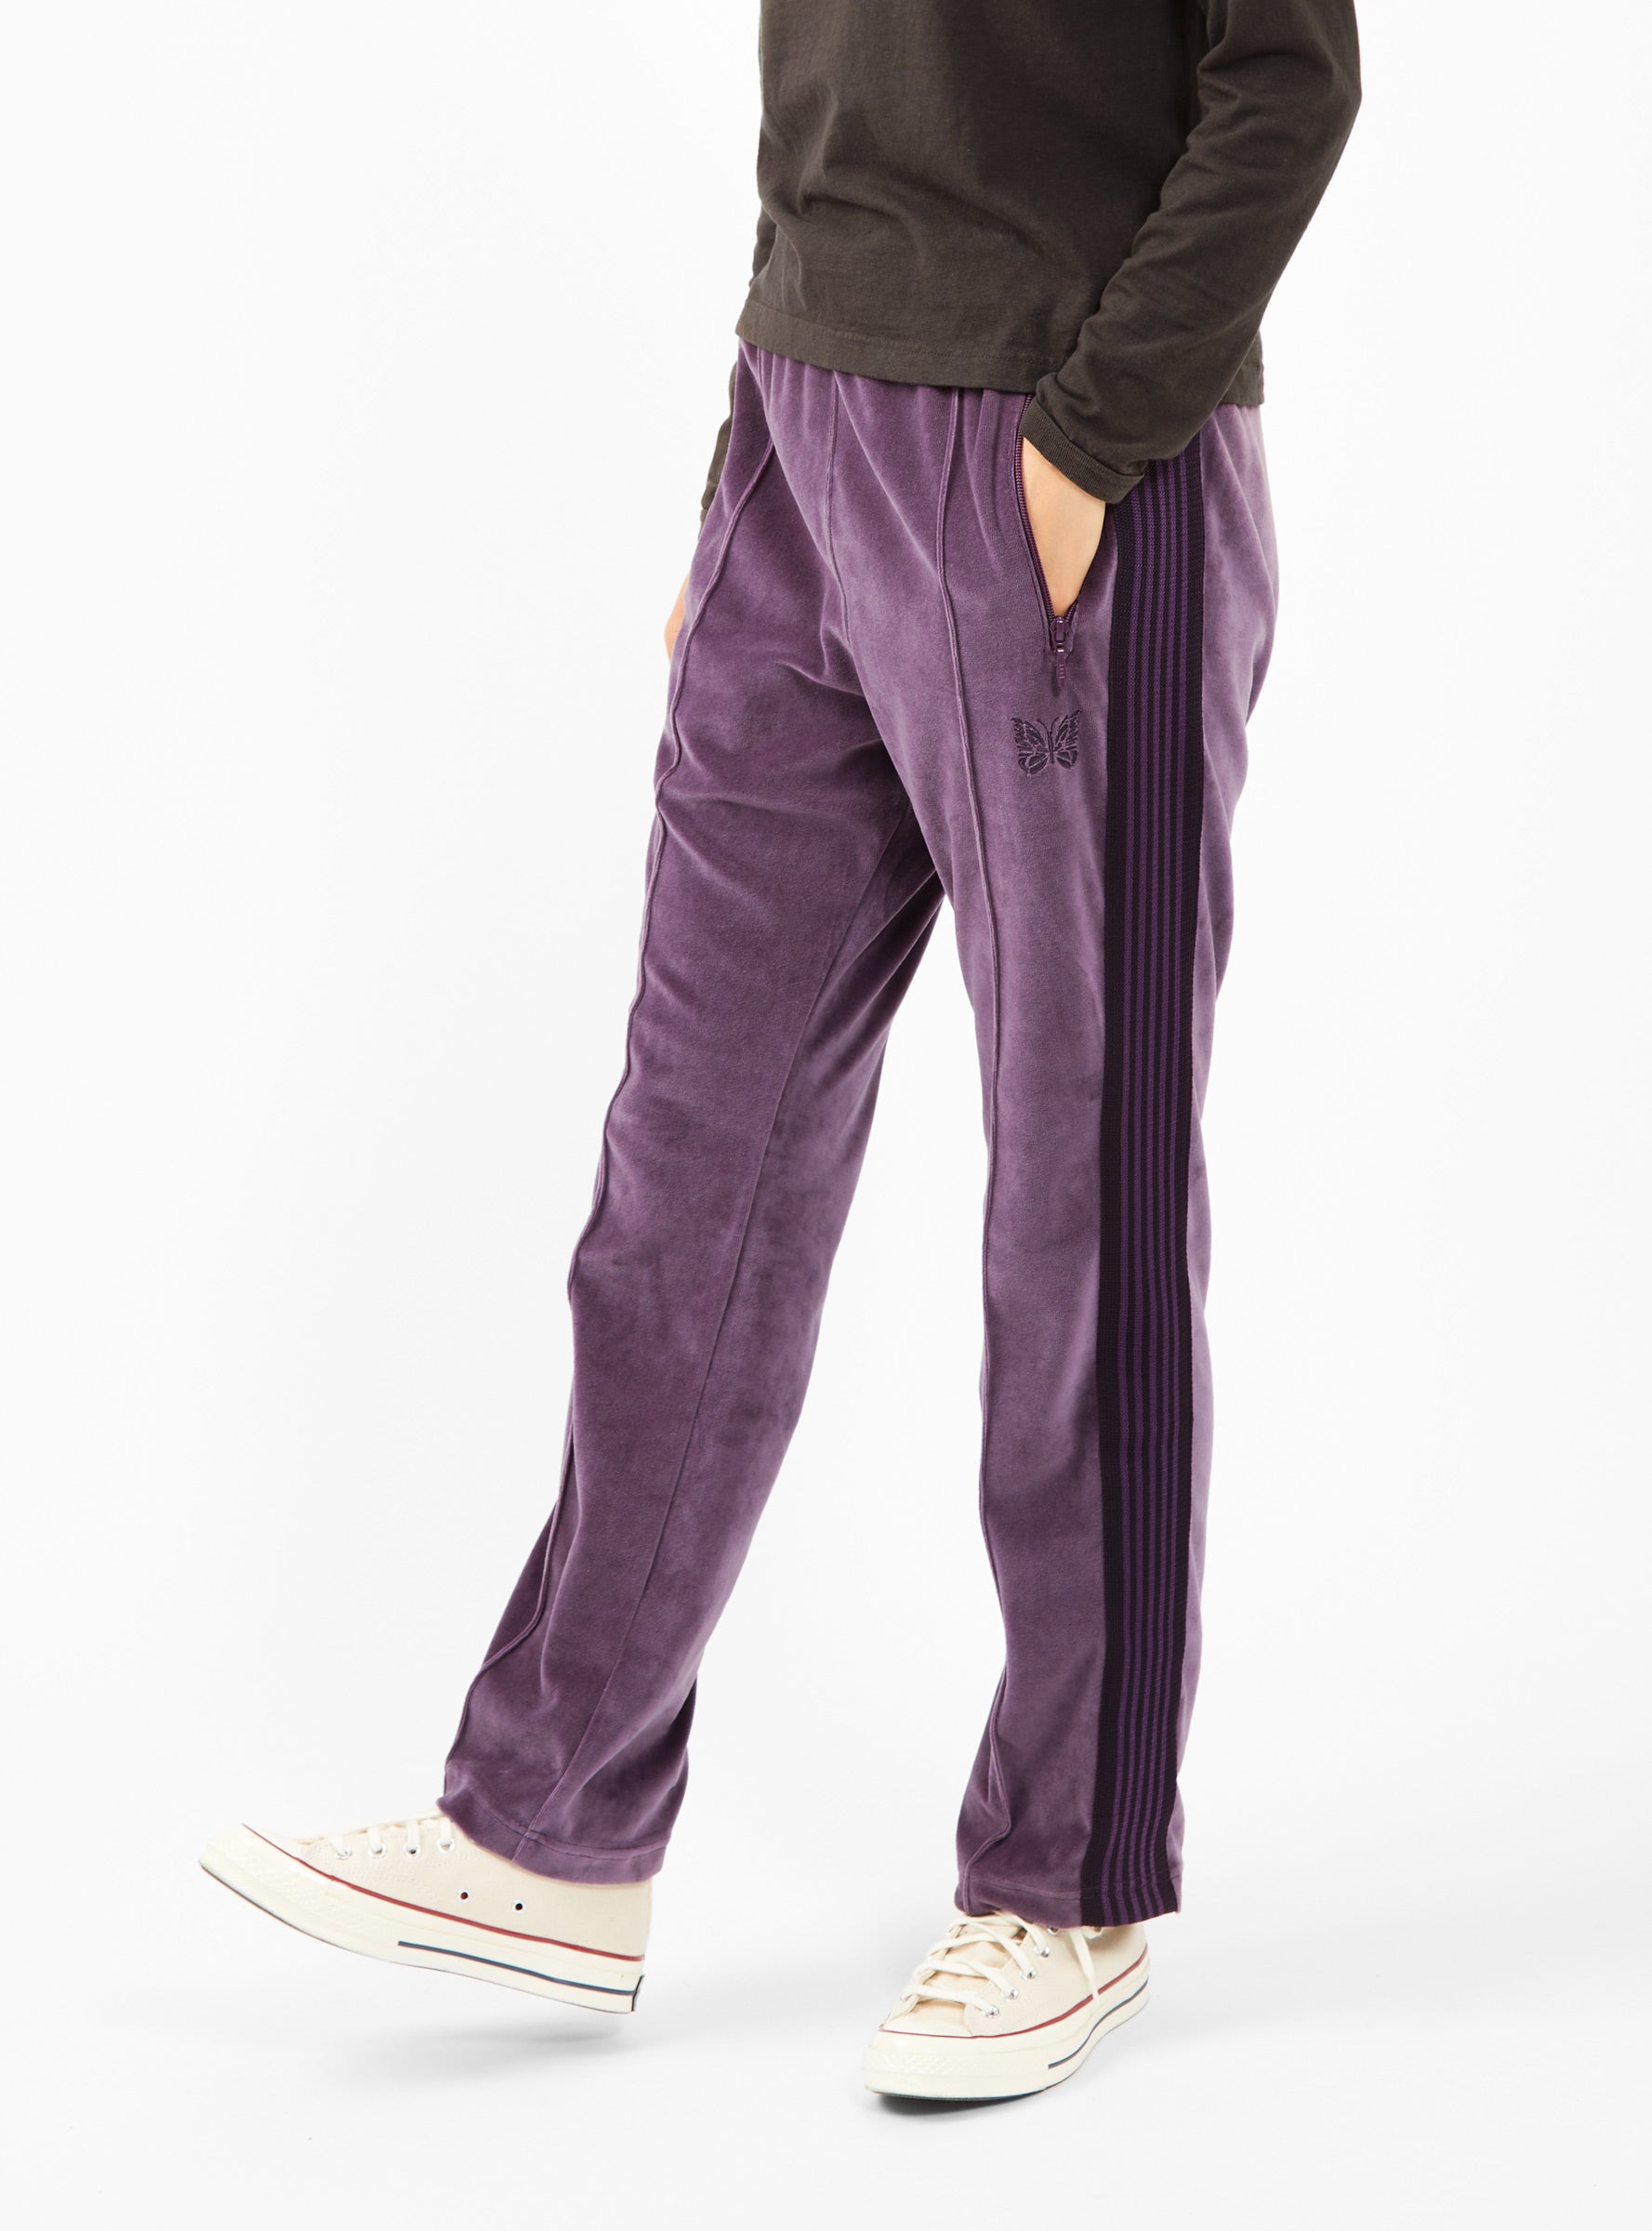 DEACON Solid Men Black Purple Track Pants  Buy DEACON Solid Men Black Purple  Track Pants Online at Best Prices in India  Shopsyin